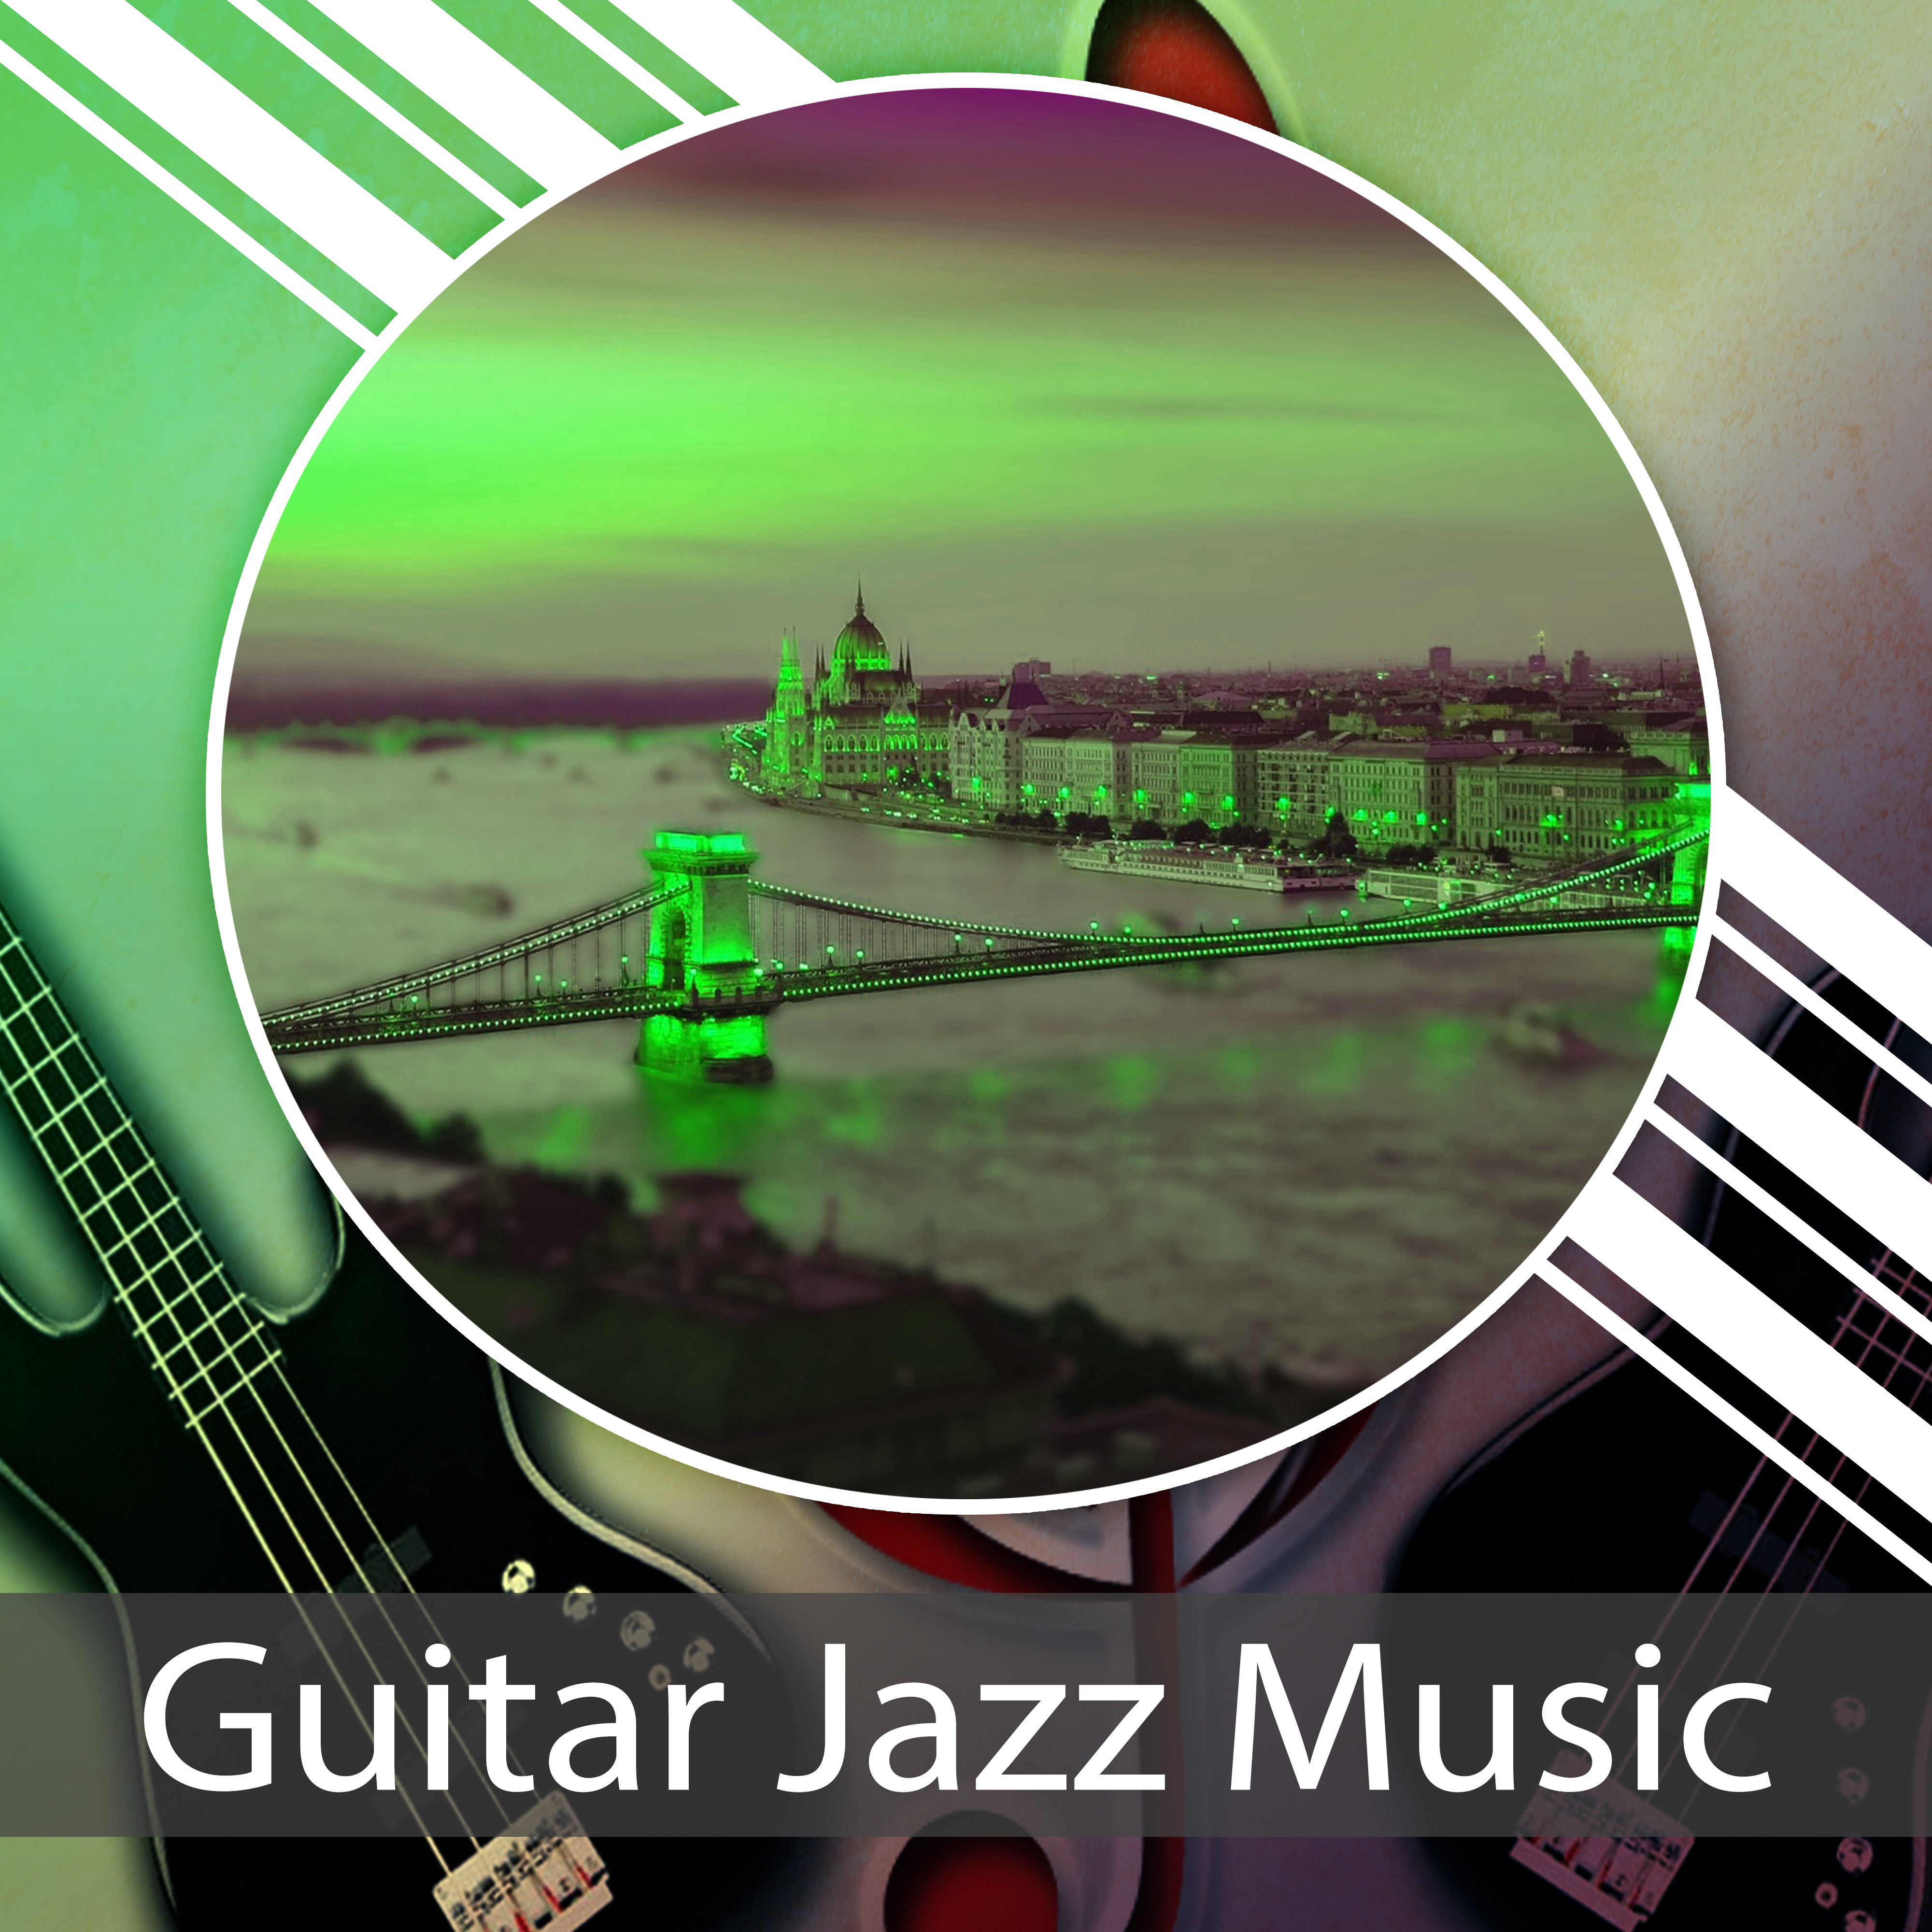 Guitar Jazz Music  Stress Relief, Jazz Sounds, Music to Calm Down, Easy Listening, Smooth Guitar